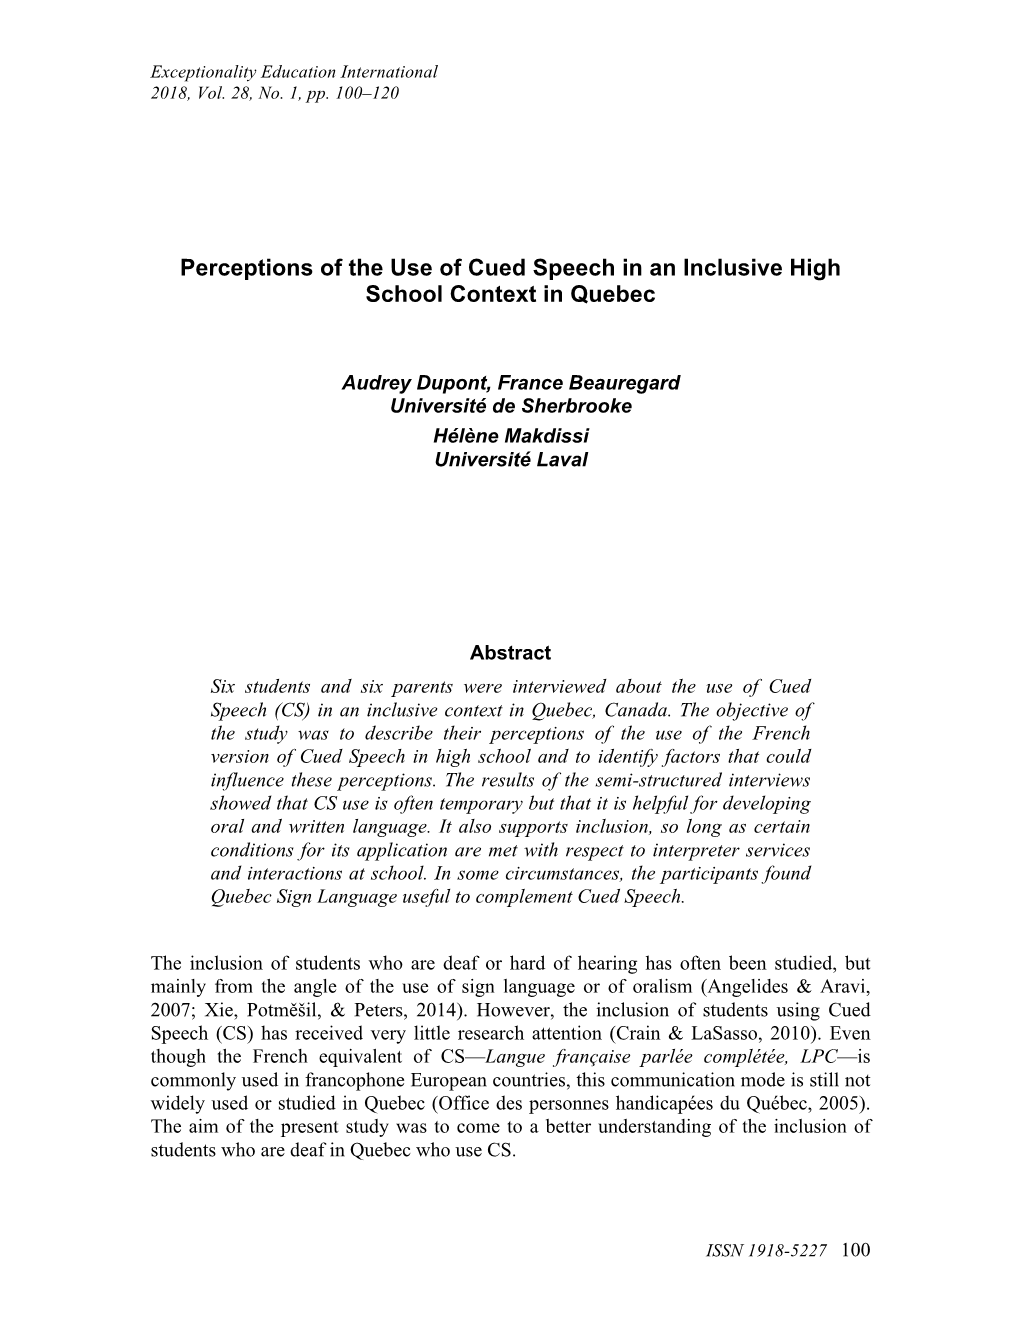 Perceptions of the Use of Cued Speech in an Inclusive High School Context in Quebec